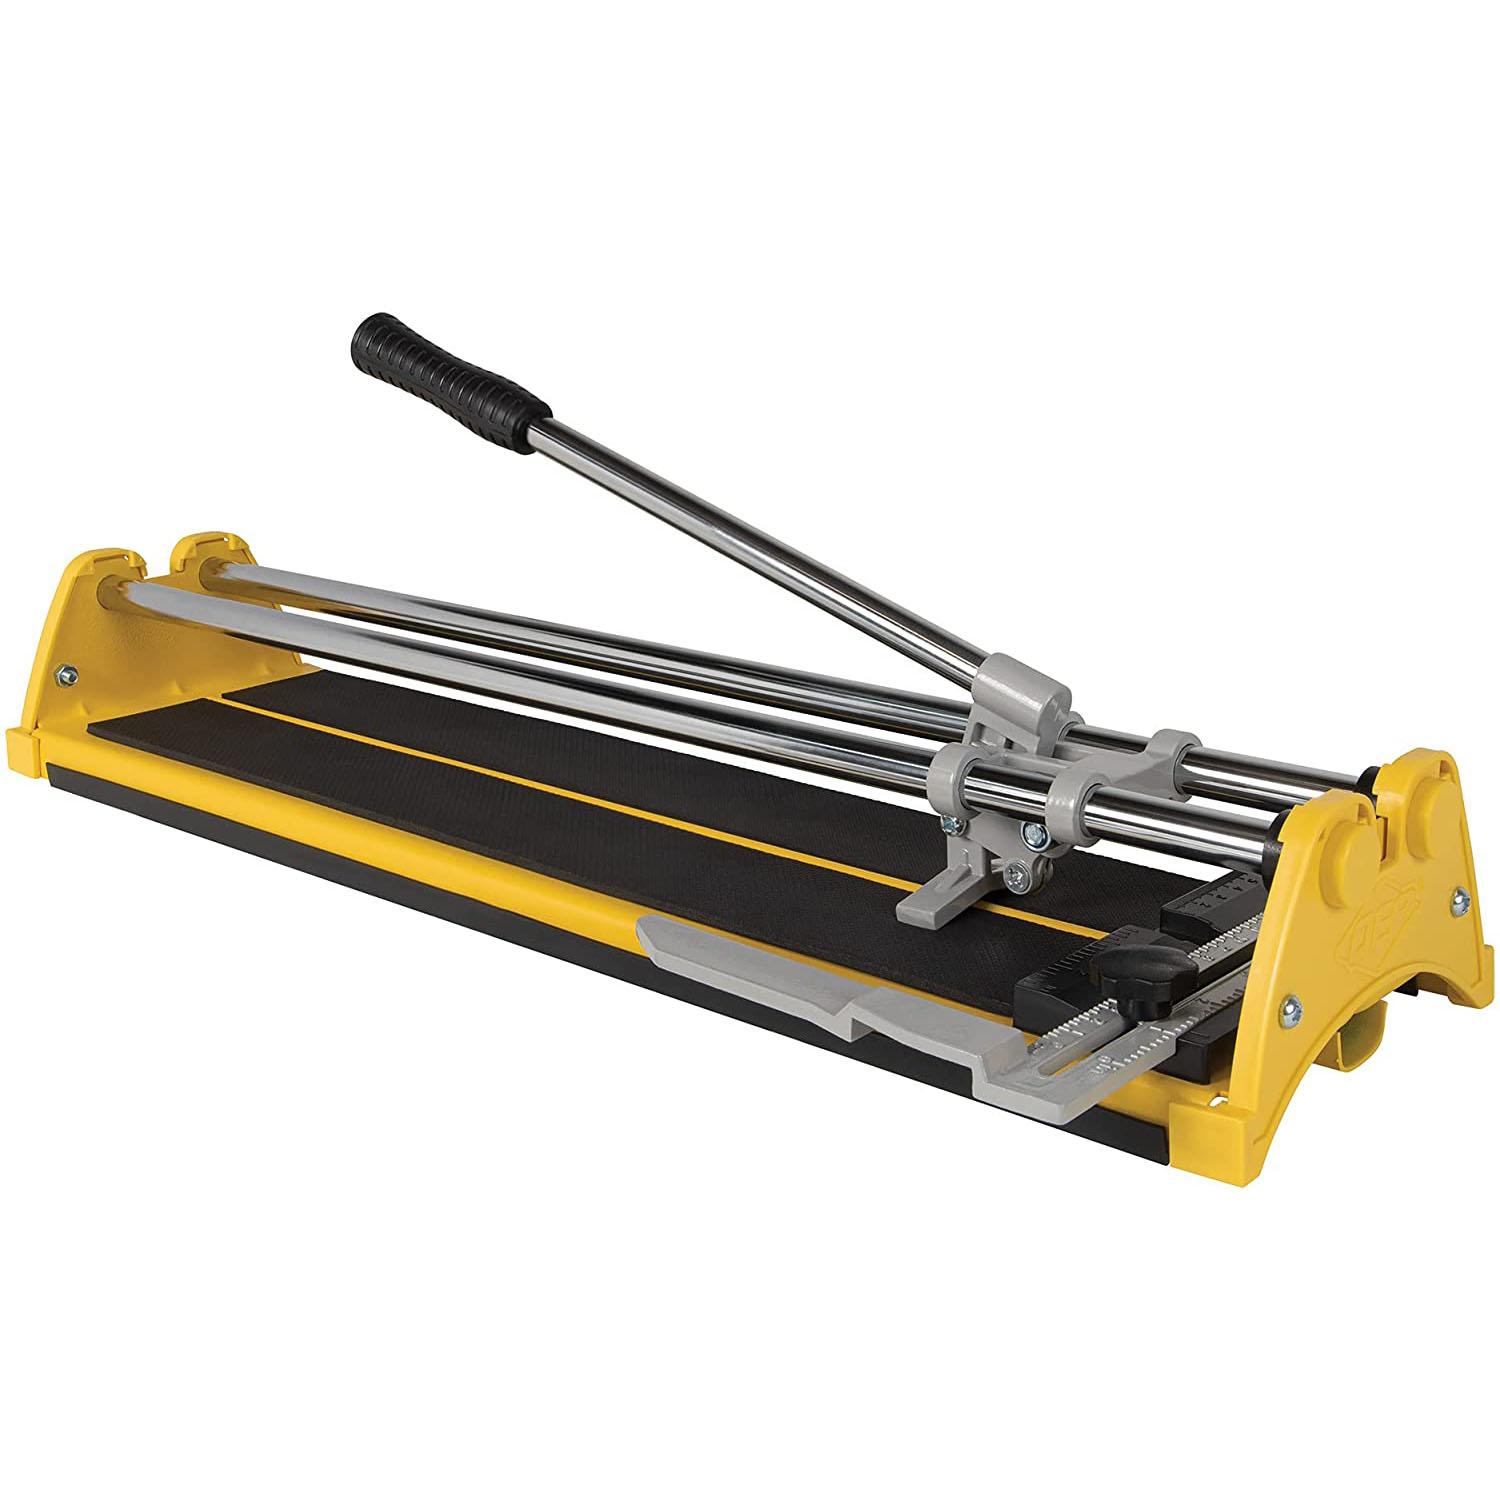 Featured image for “Ceramic Tile Cutter”